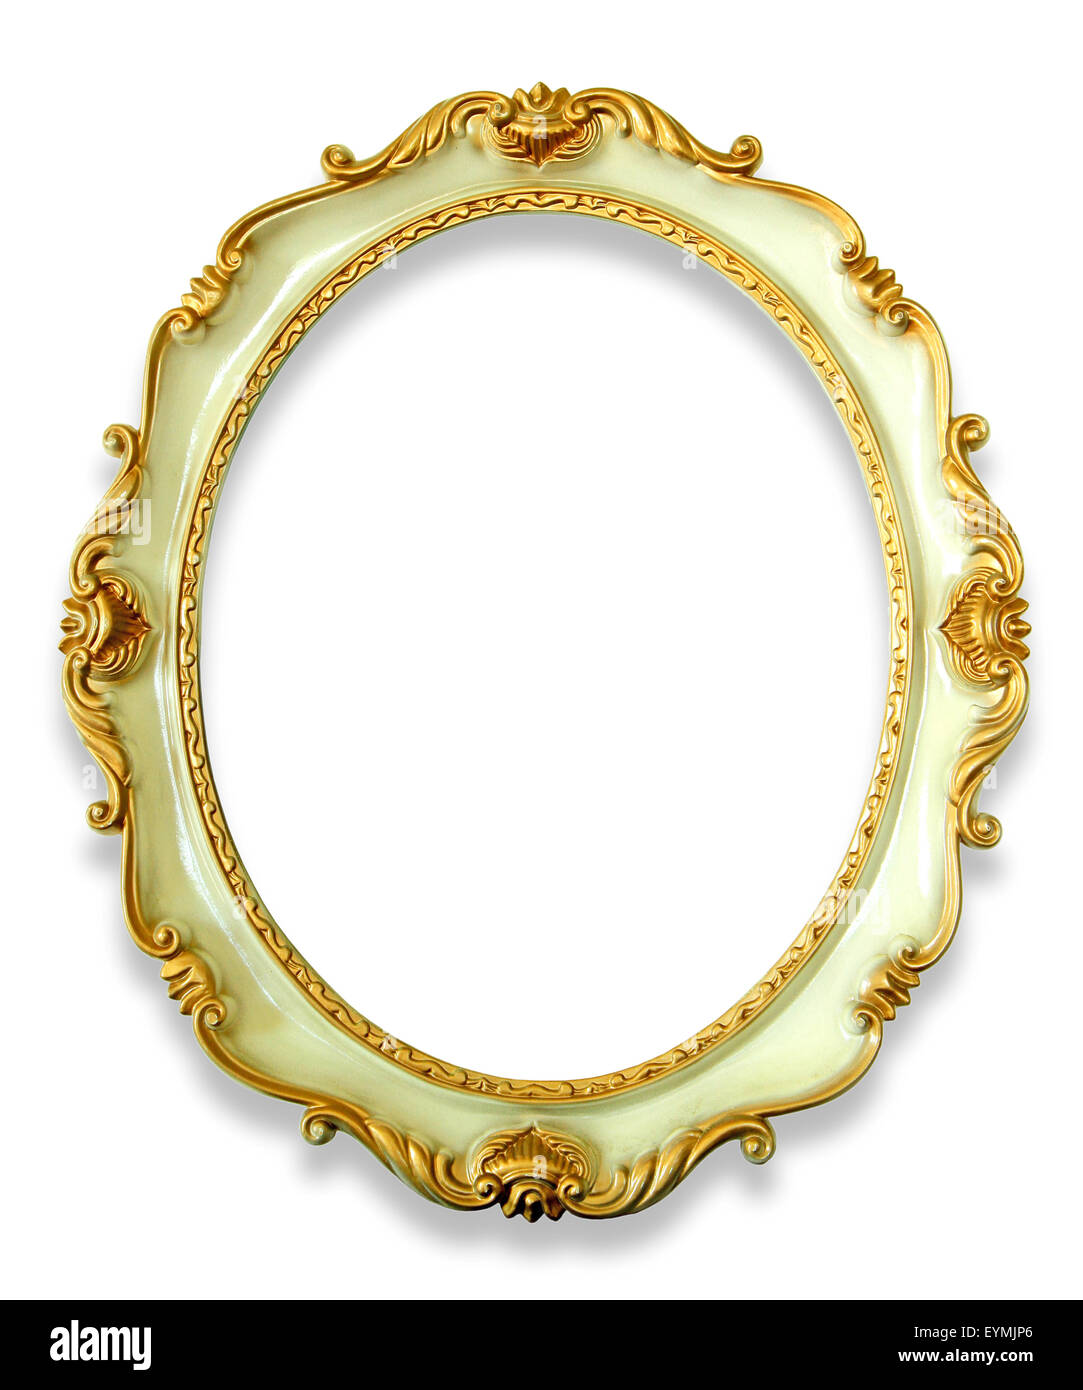 White Antique Picture Frame Isolated Stock Photo, Picture and Royalty Free  Image. Image 23247676.